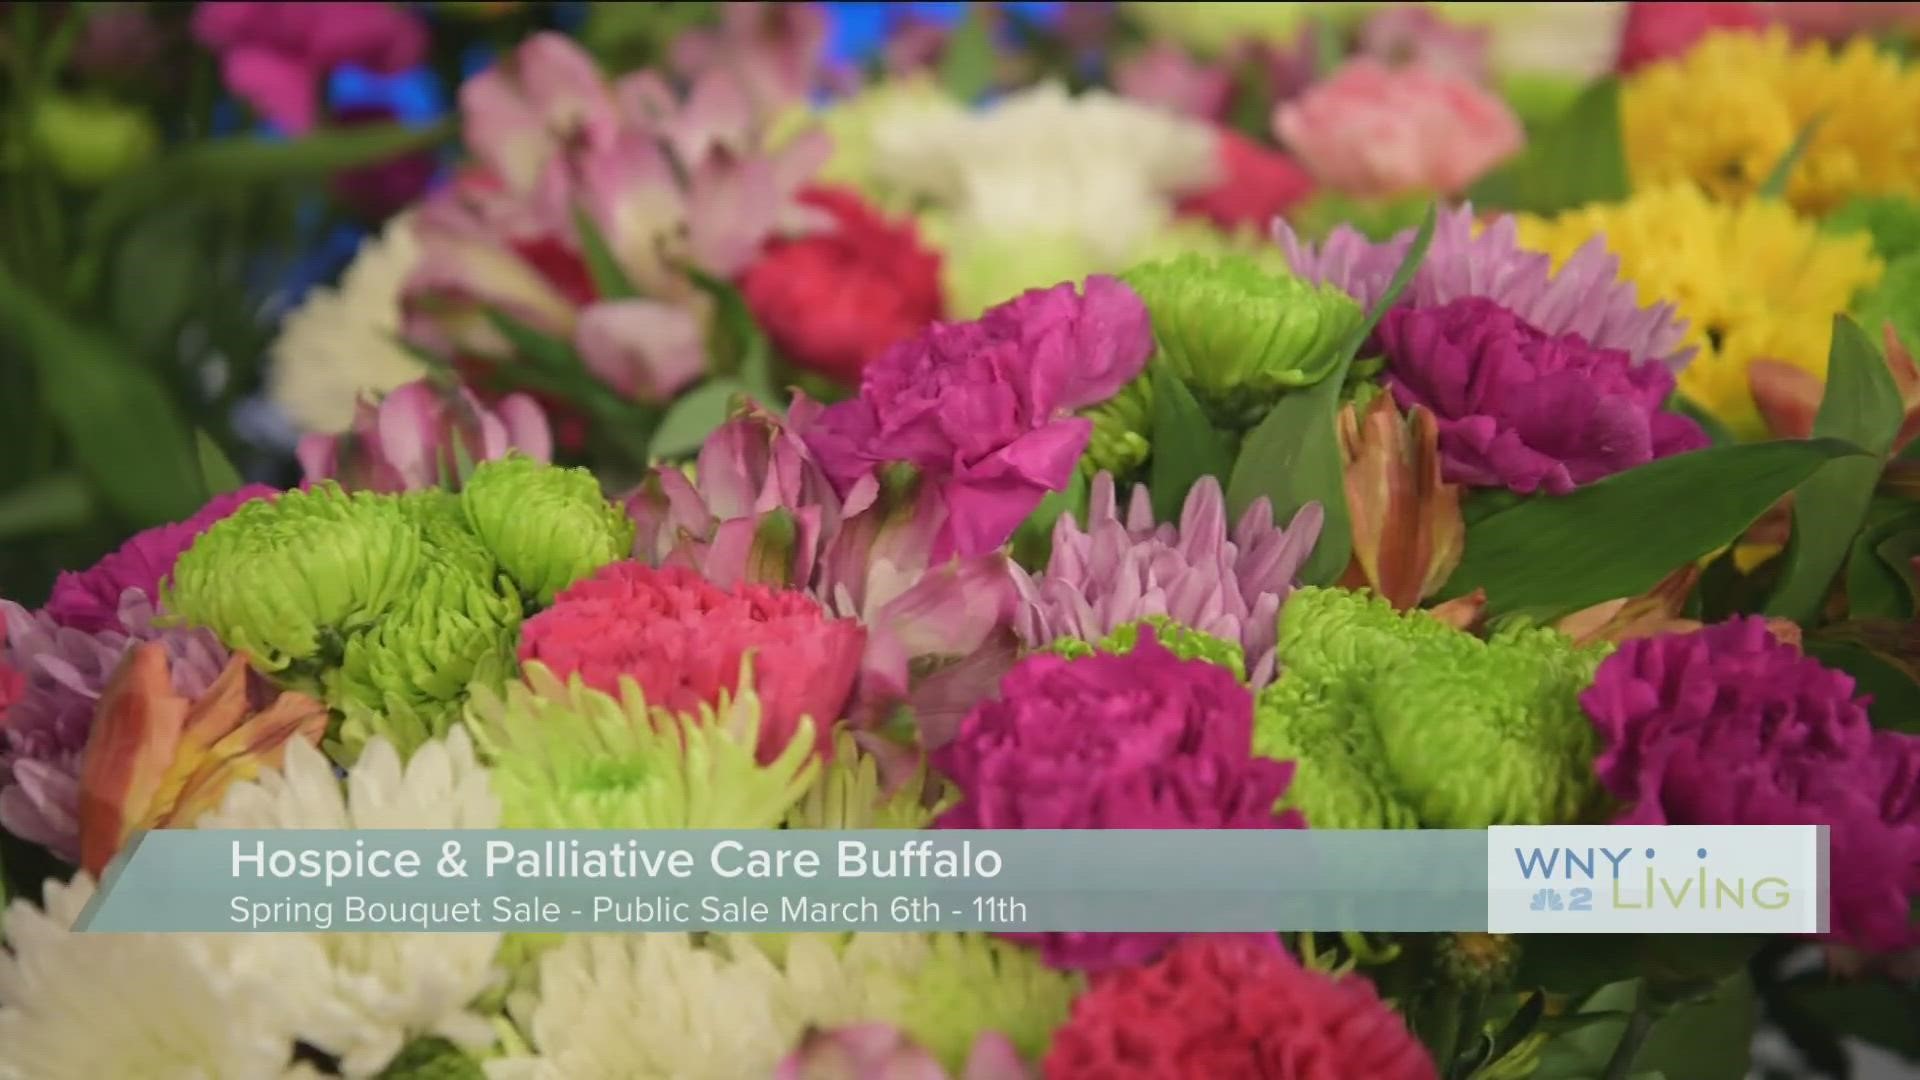 WNY Living -February 25th - Hospice Spring Bouquet Sale  - THIS VIDEO IS SPONSORED BY HOSPICE BUFFALO